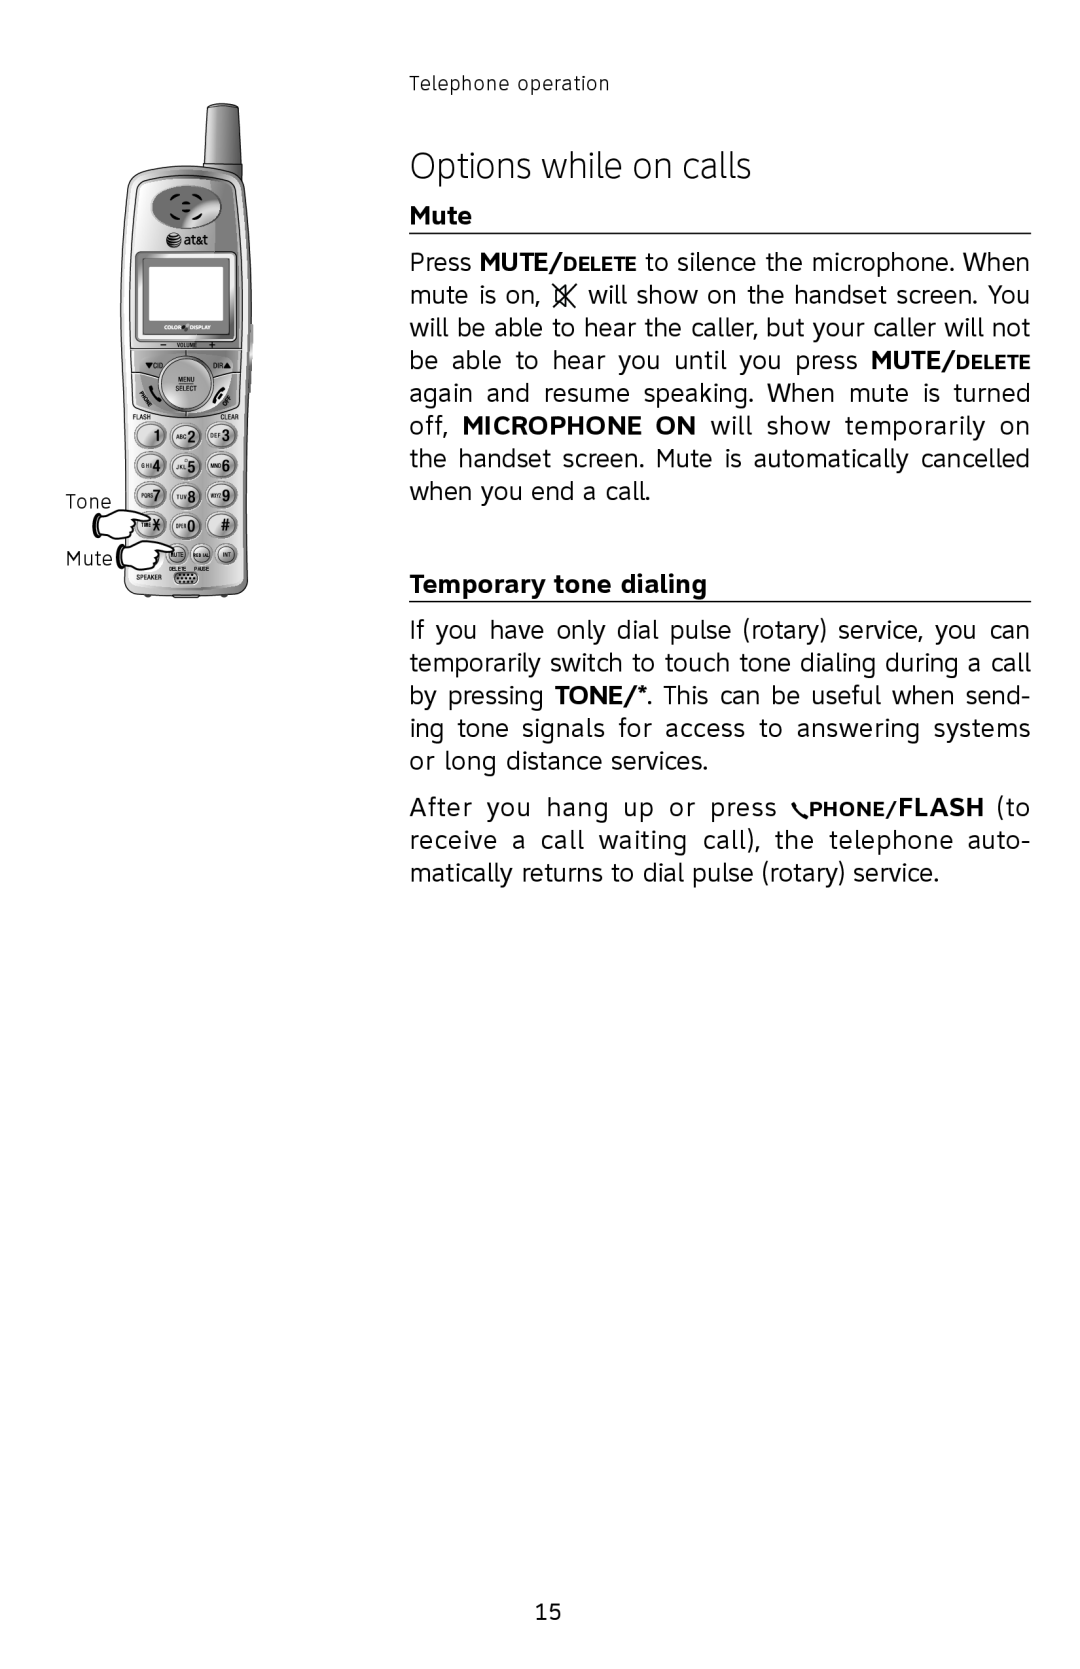 AT&T E2912 user manual Temporary tone dialing, Options while on calls, Mute Redial, Delete Pause 